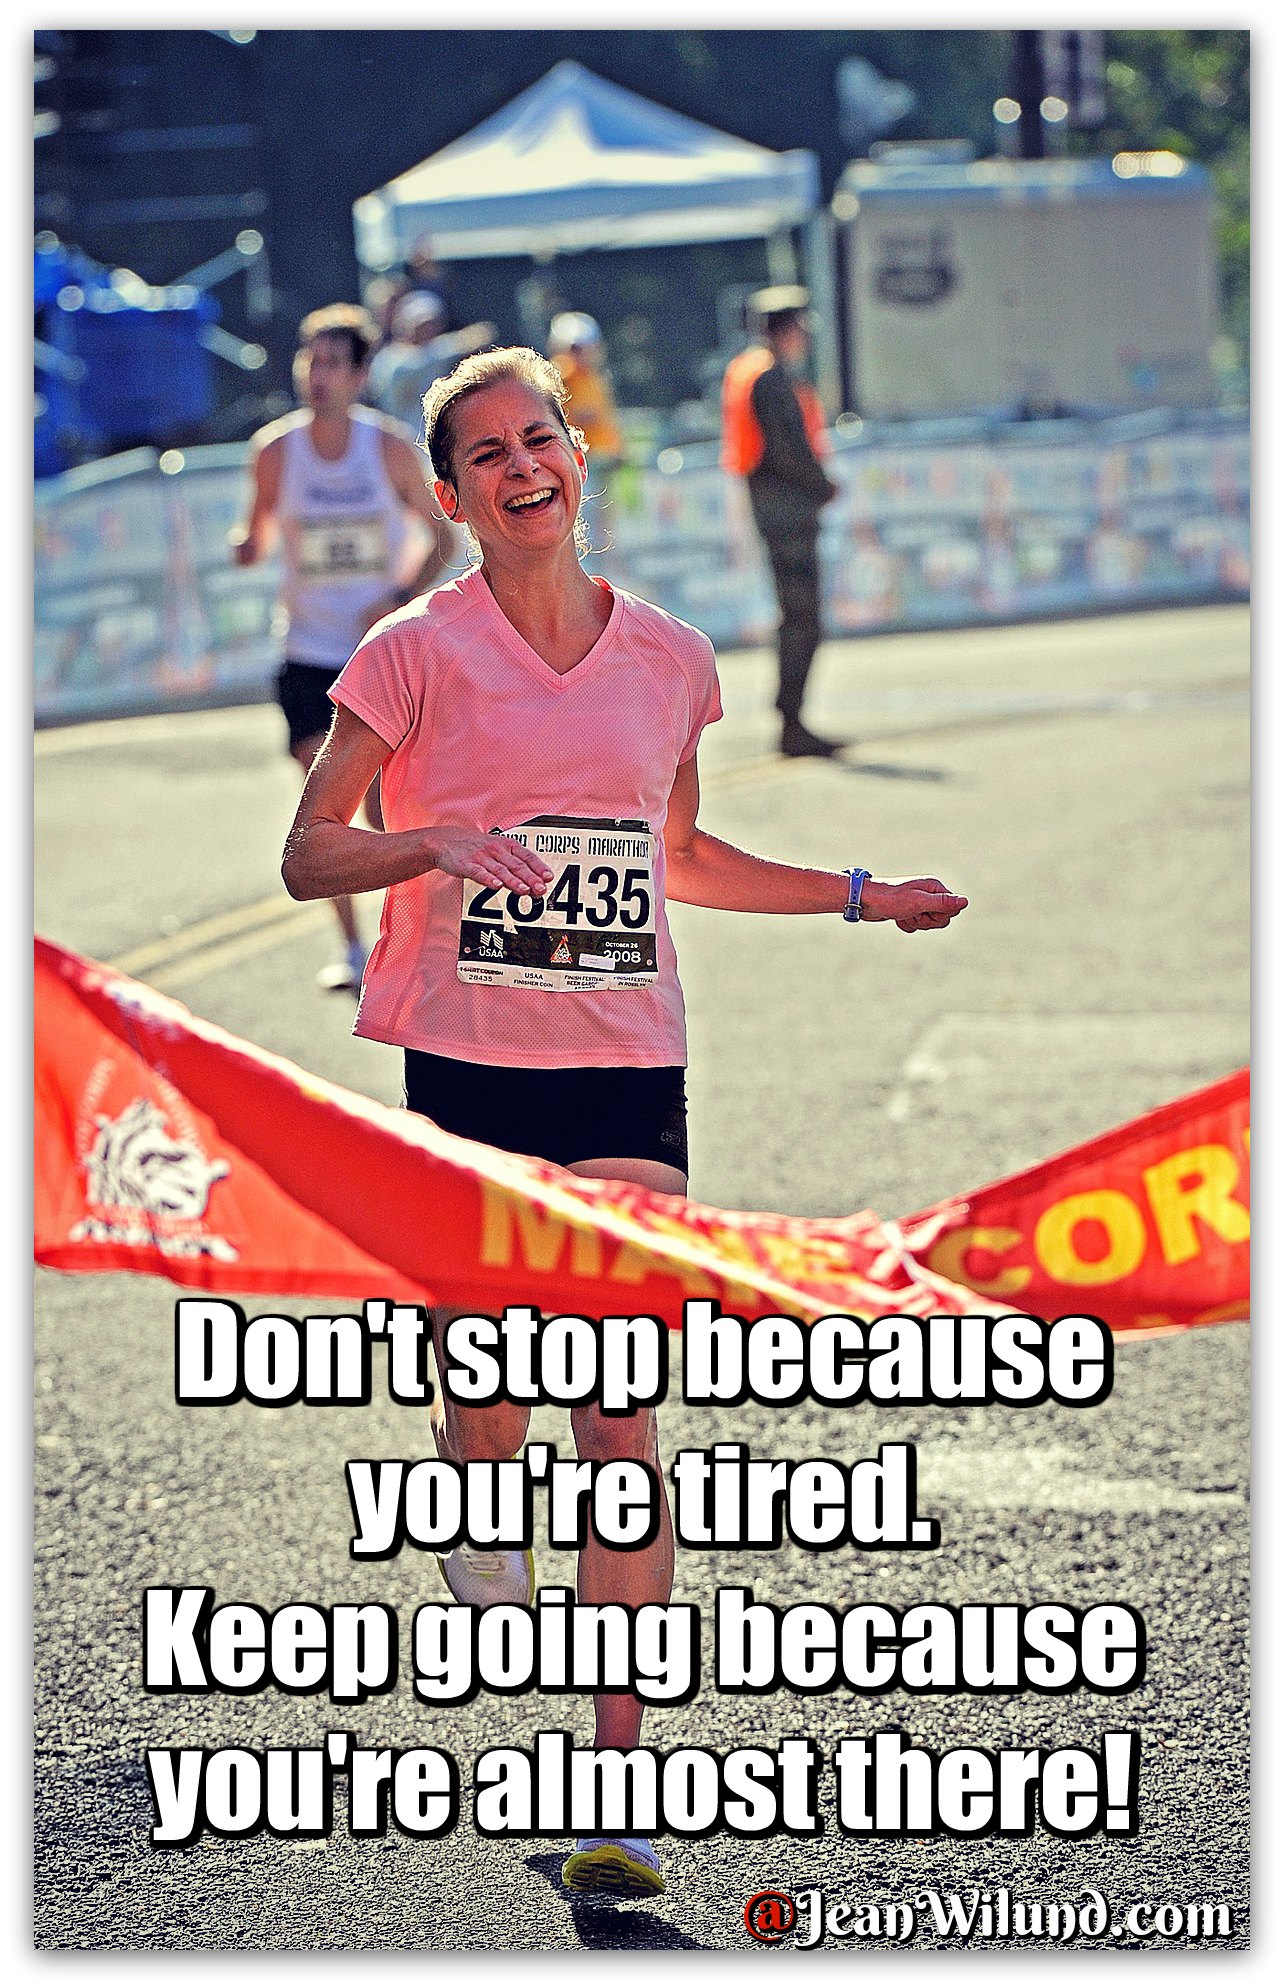 Don't stop because you're tired. Keep going because you're almost there. (Mom's Thought for the Week with Traci Burns) via www.JeanWilund.com